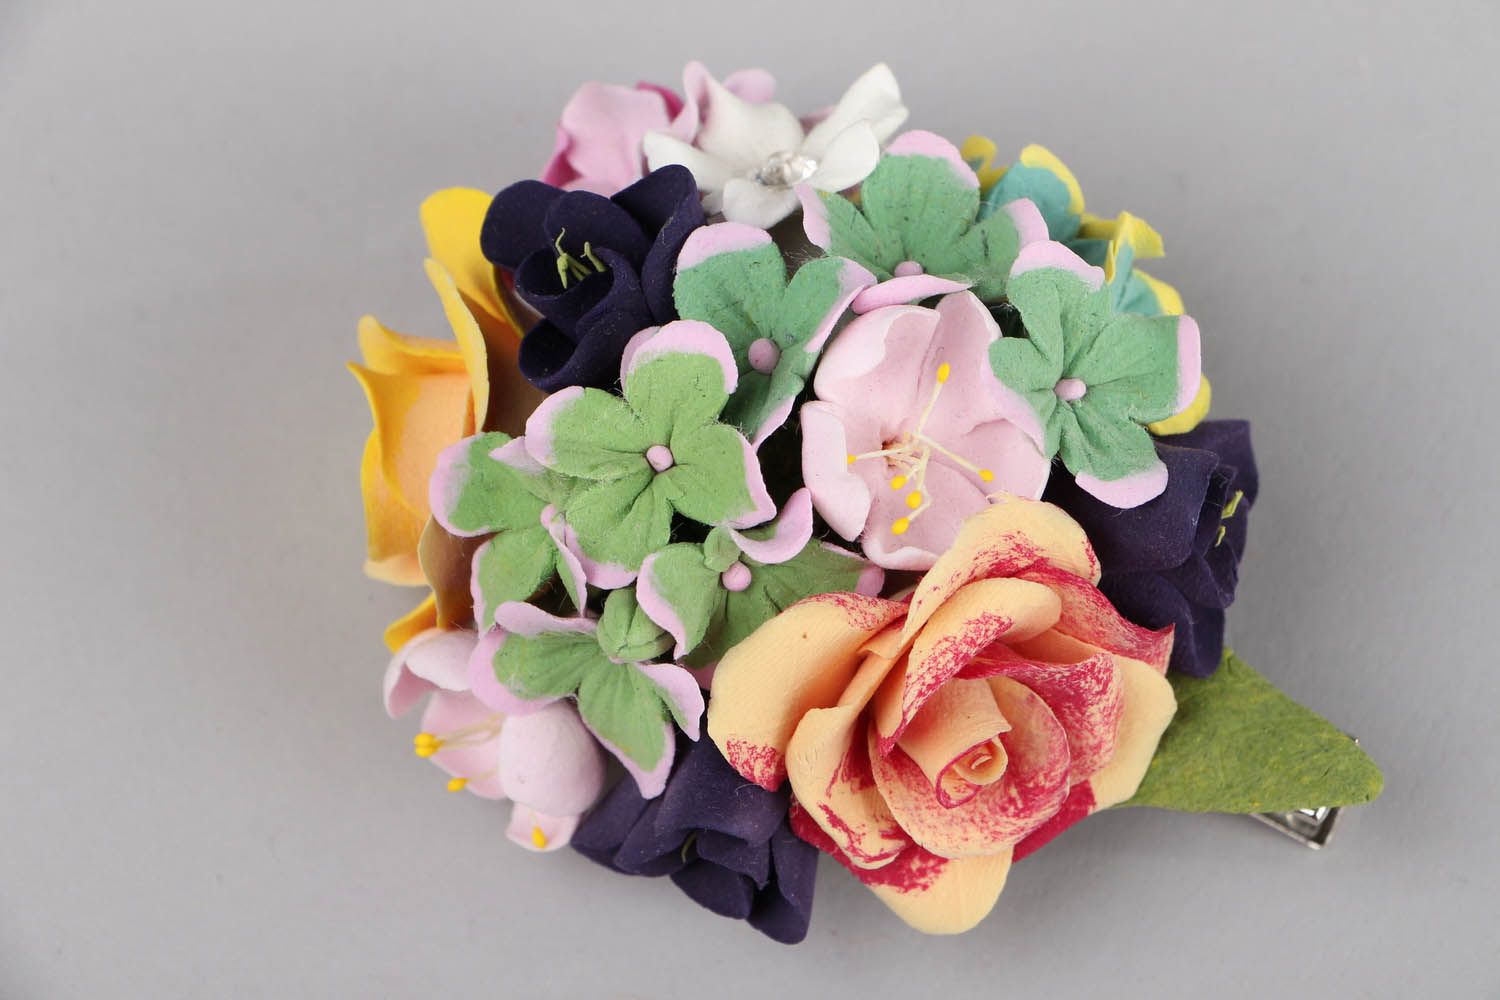 Barrette Made of Artificial Flowers photo 1